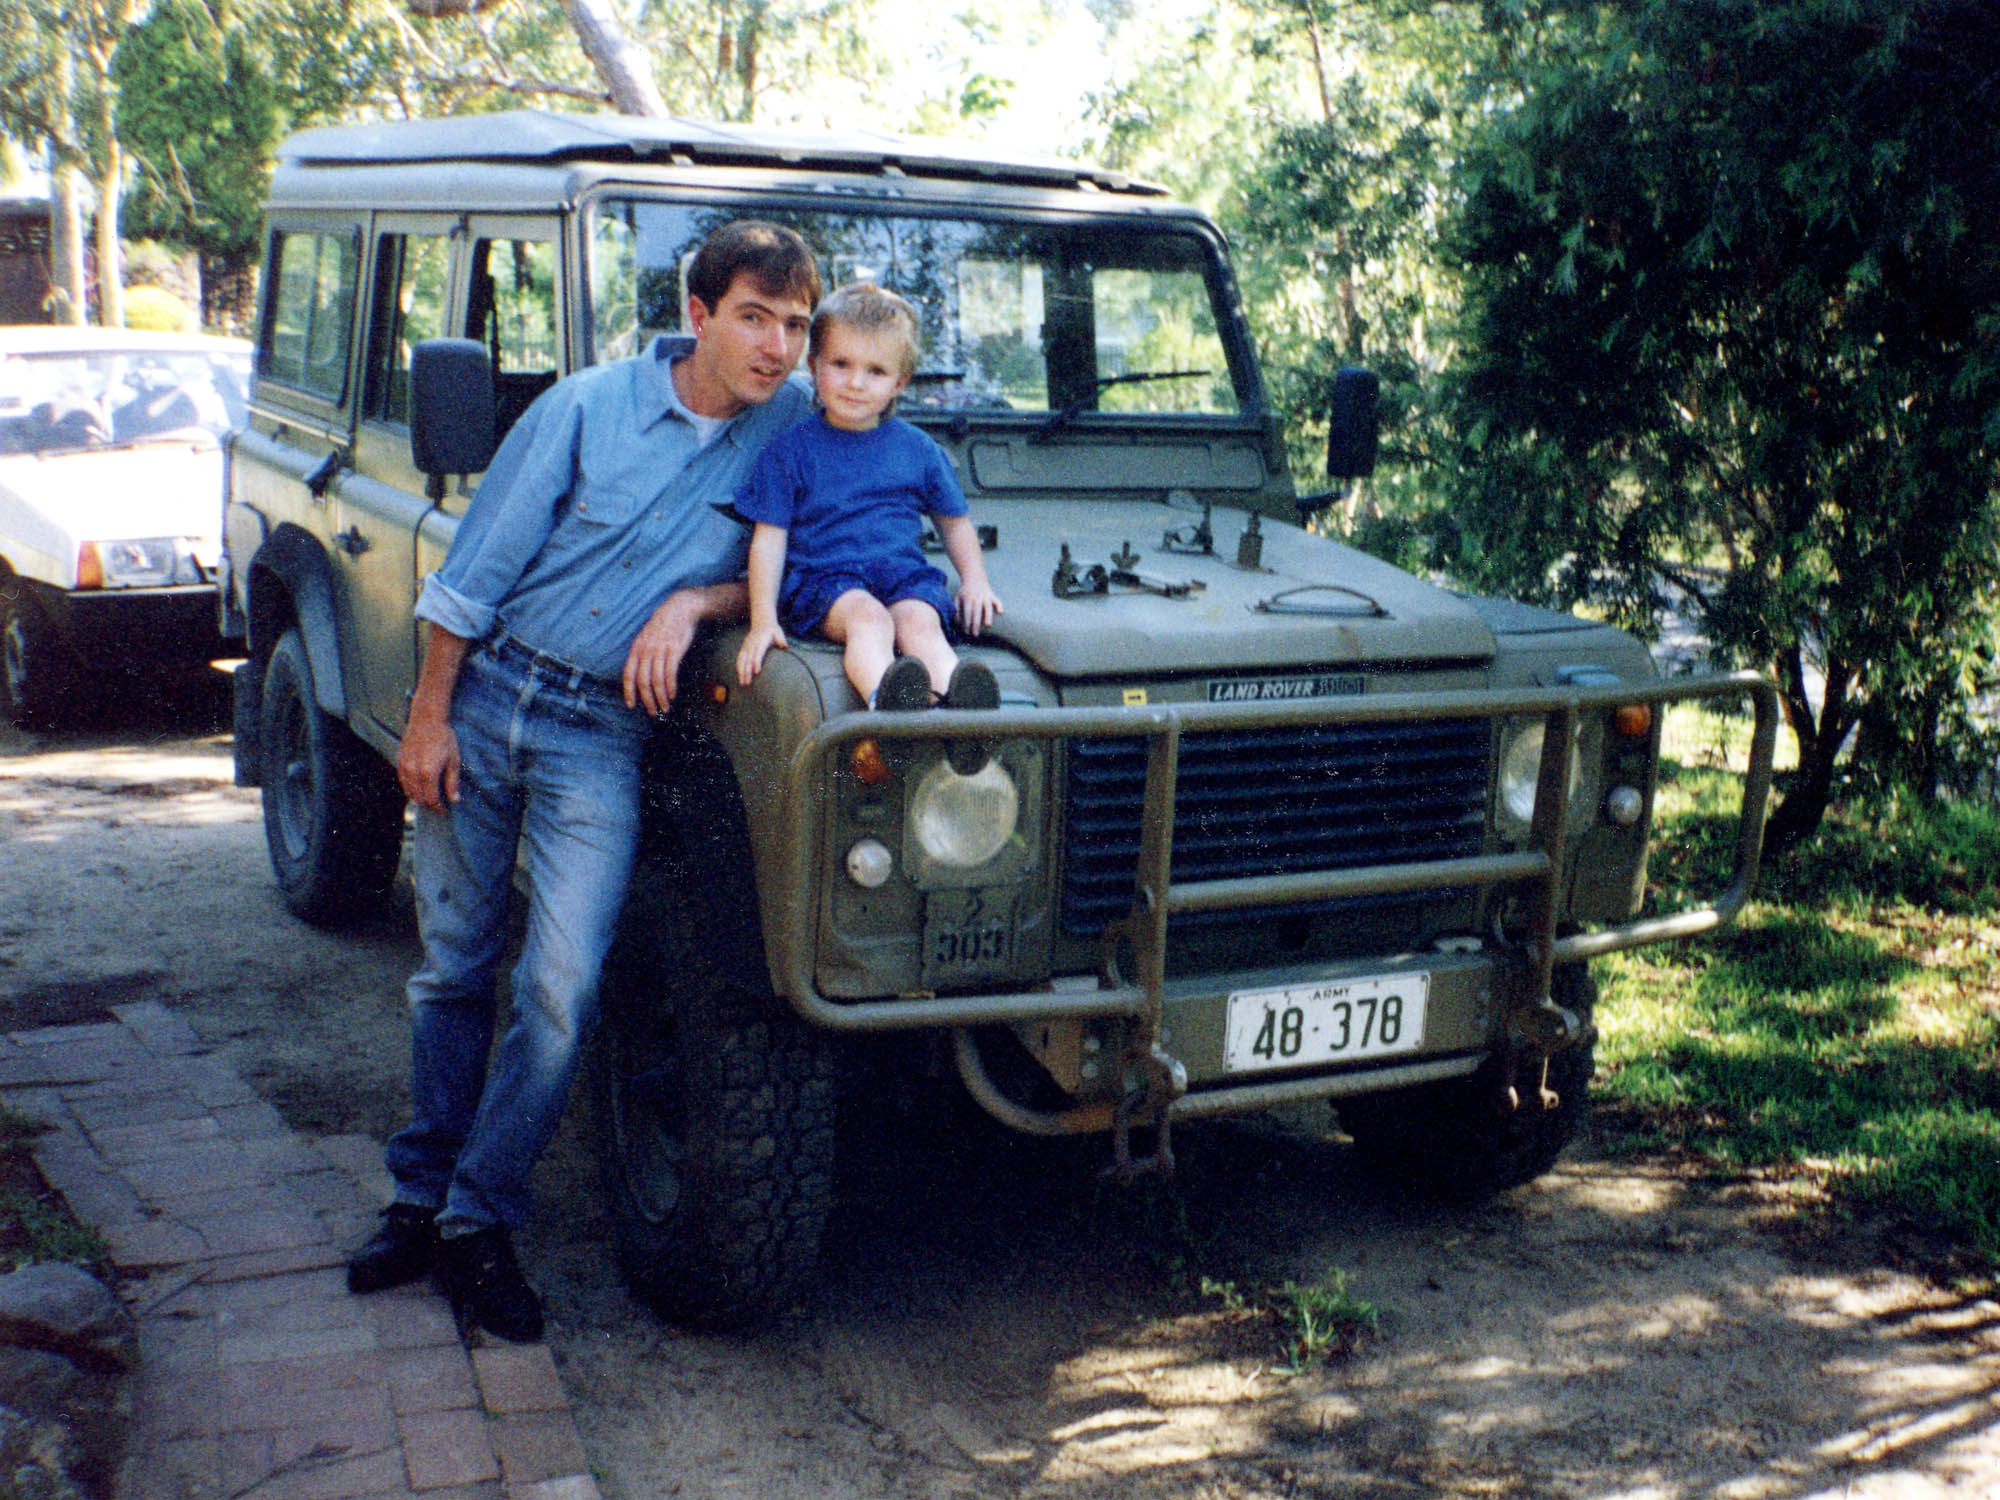 Matt and James – their first exposure to a Land Rover Perentie.